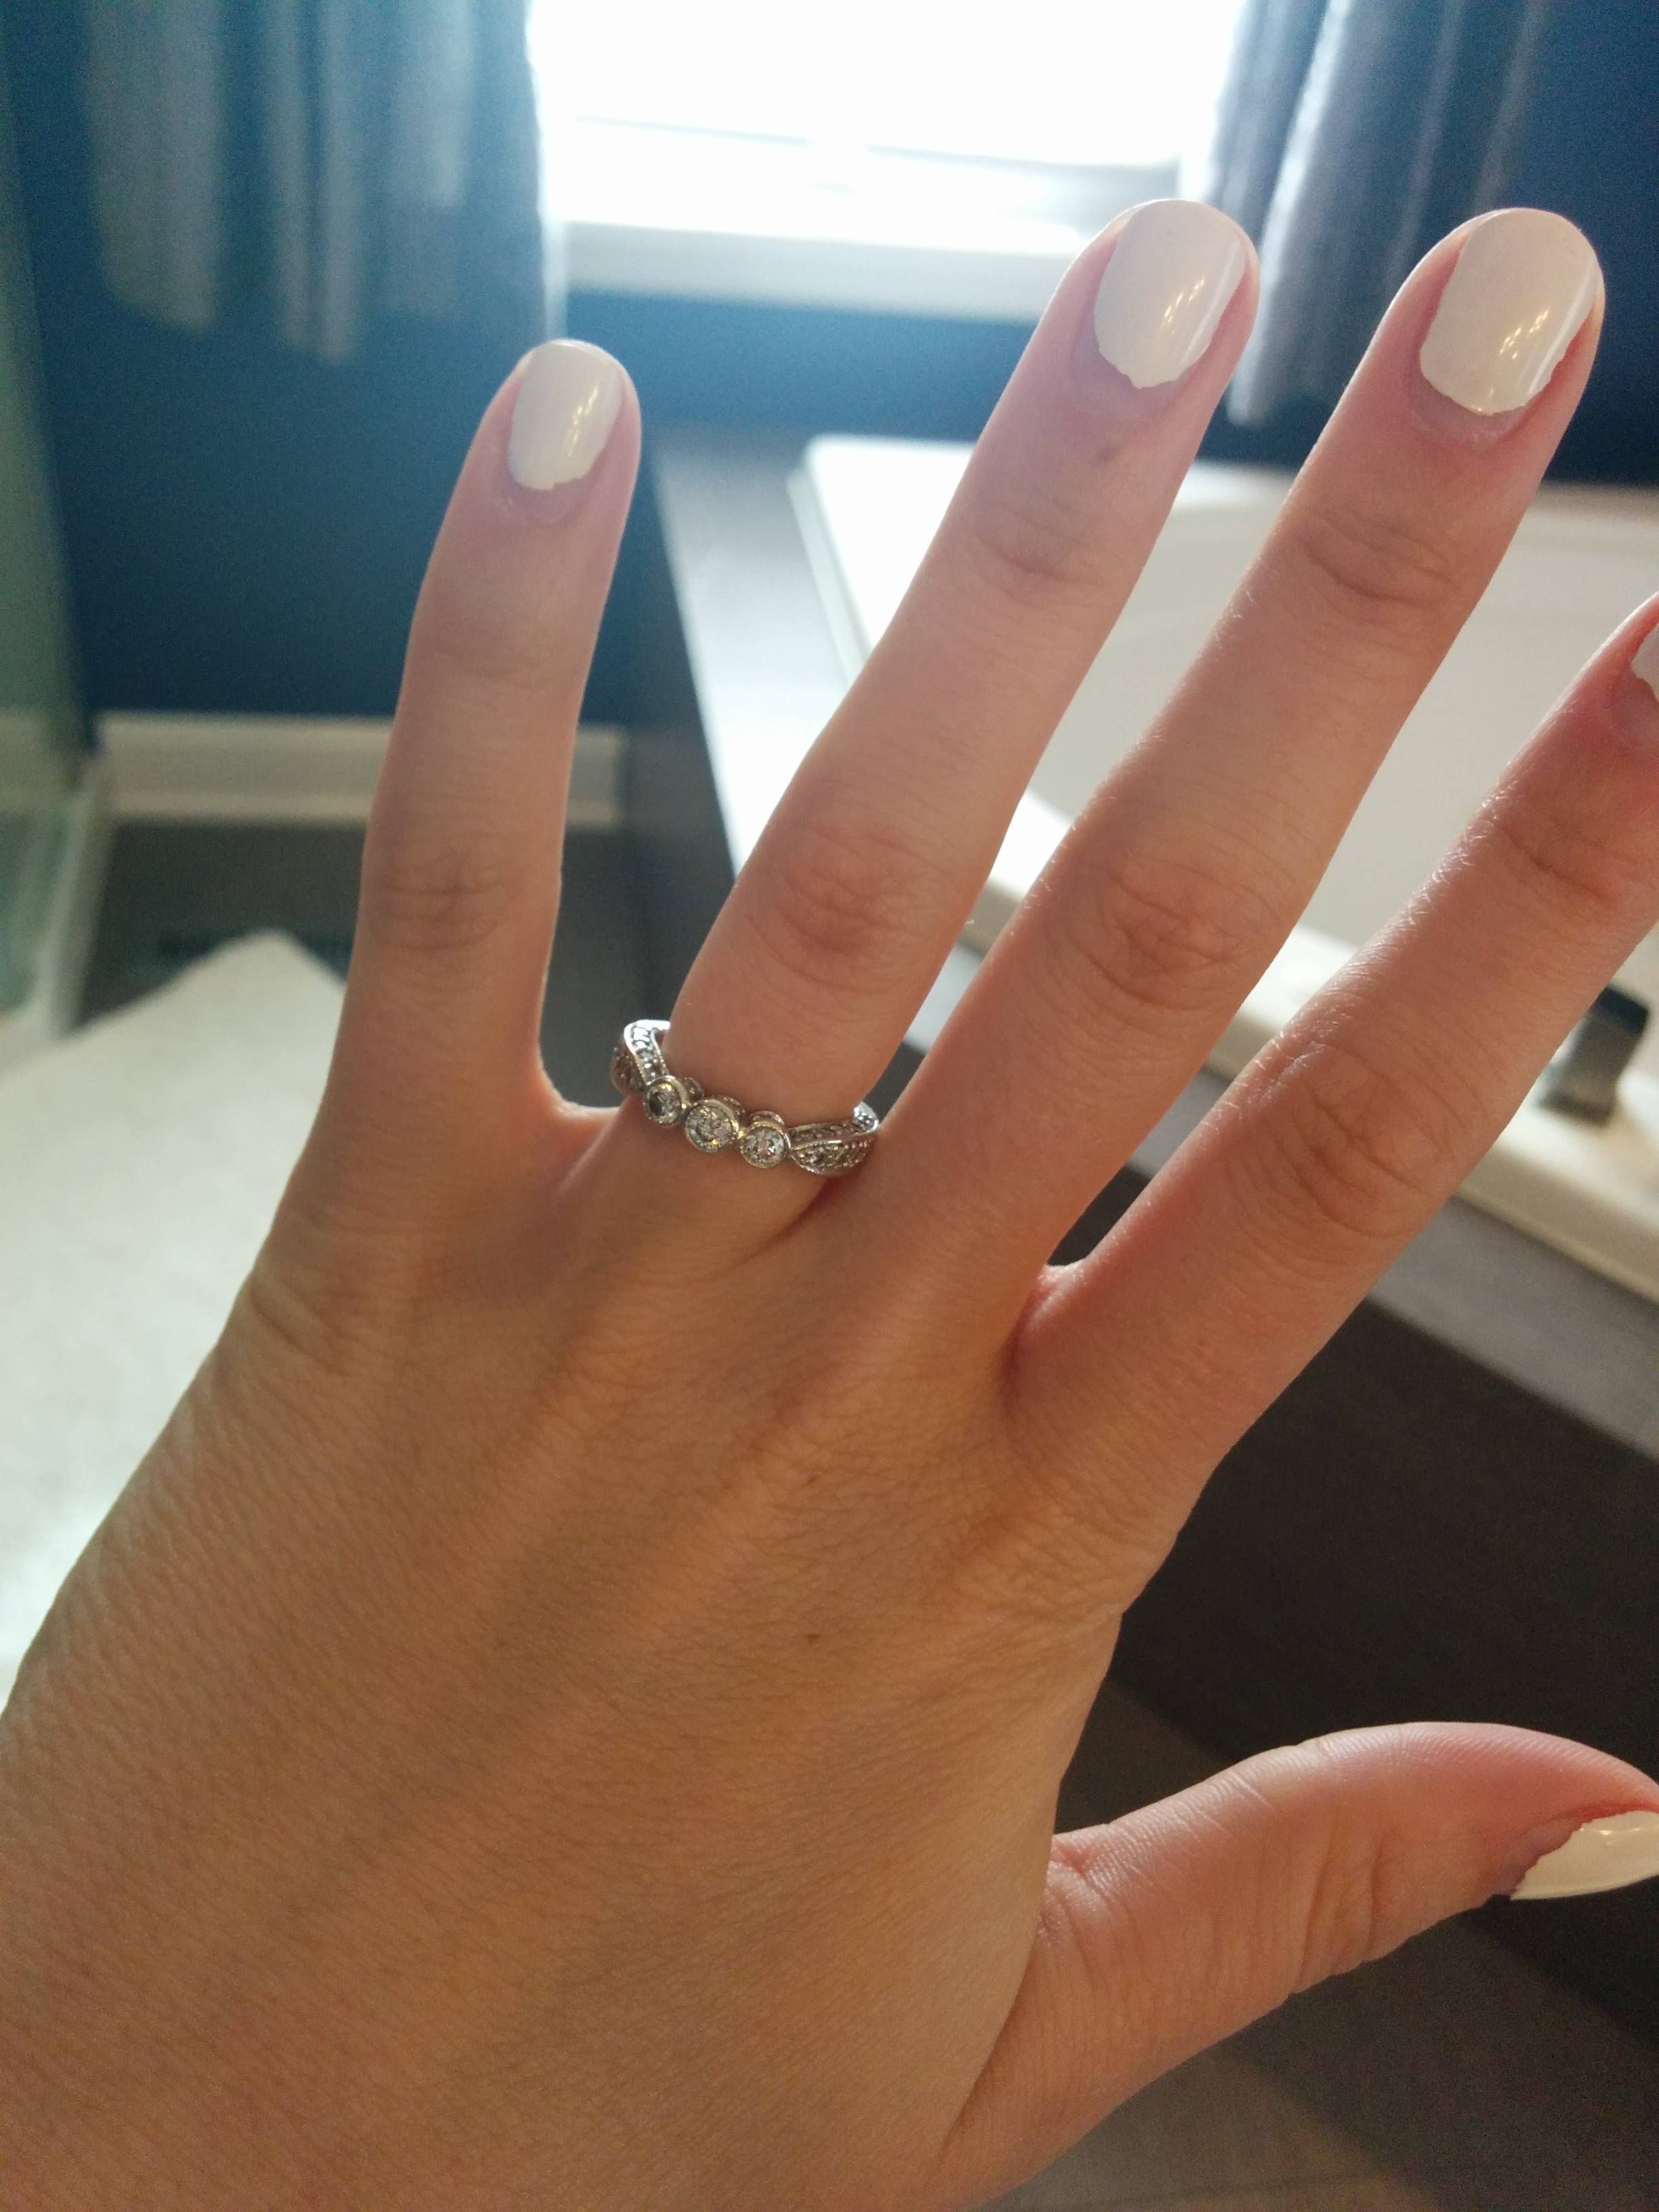 10th Anniversary Ring Upgrade Help! – Weddingbee In Most Up To Date 10th Anniversary Rings (View 1 of 15)